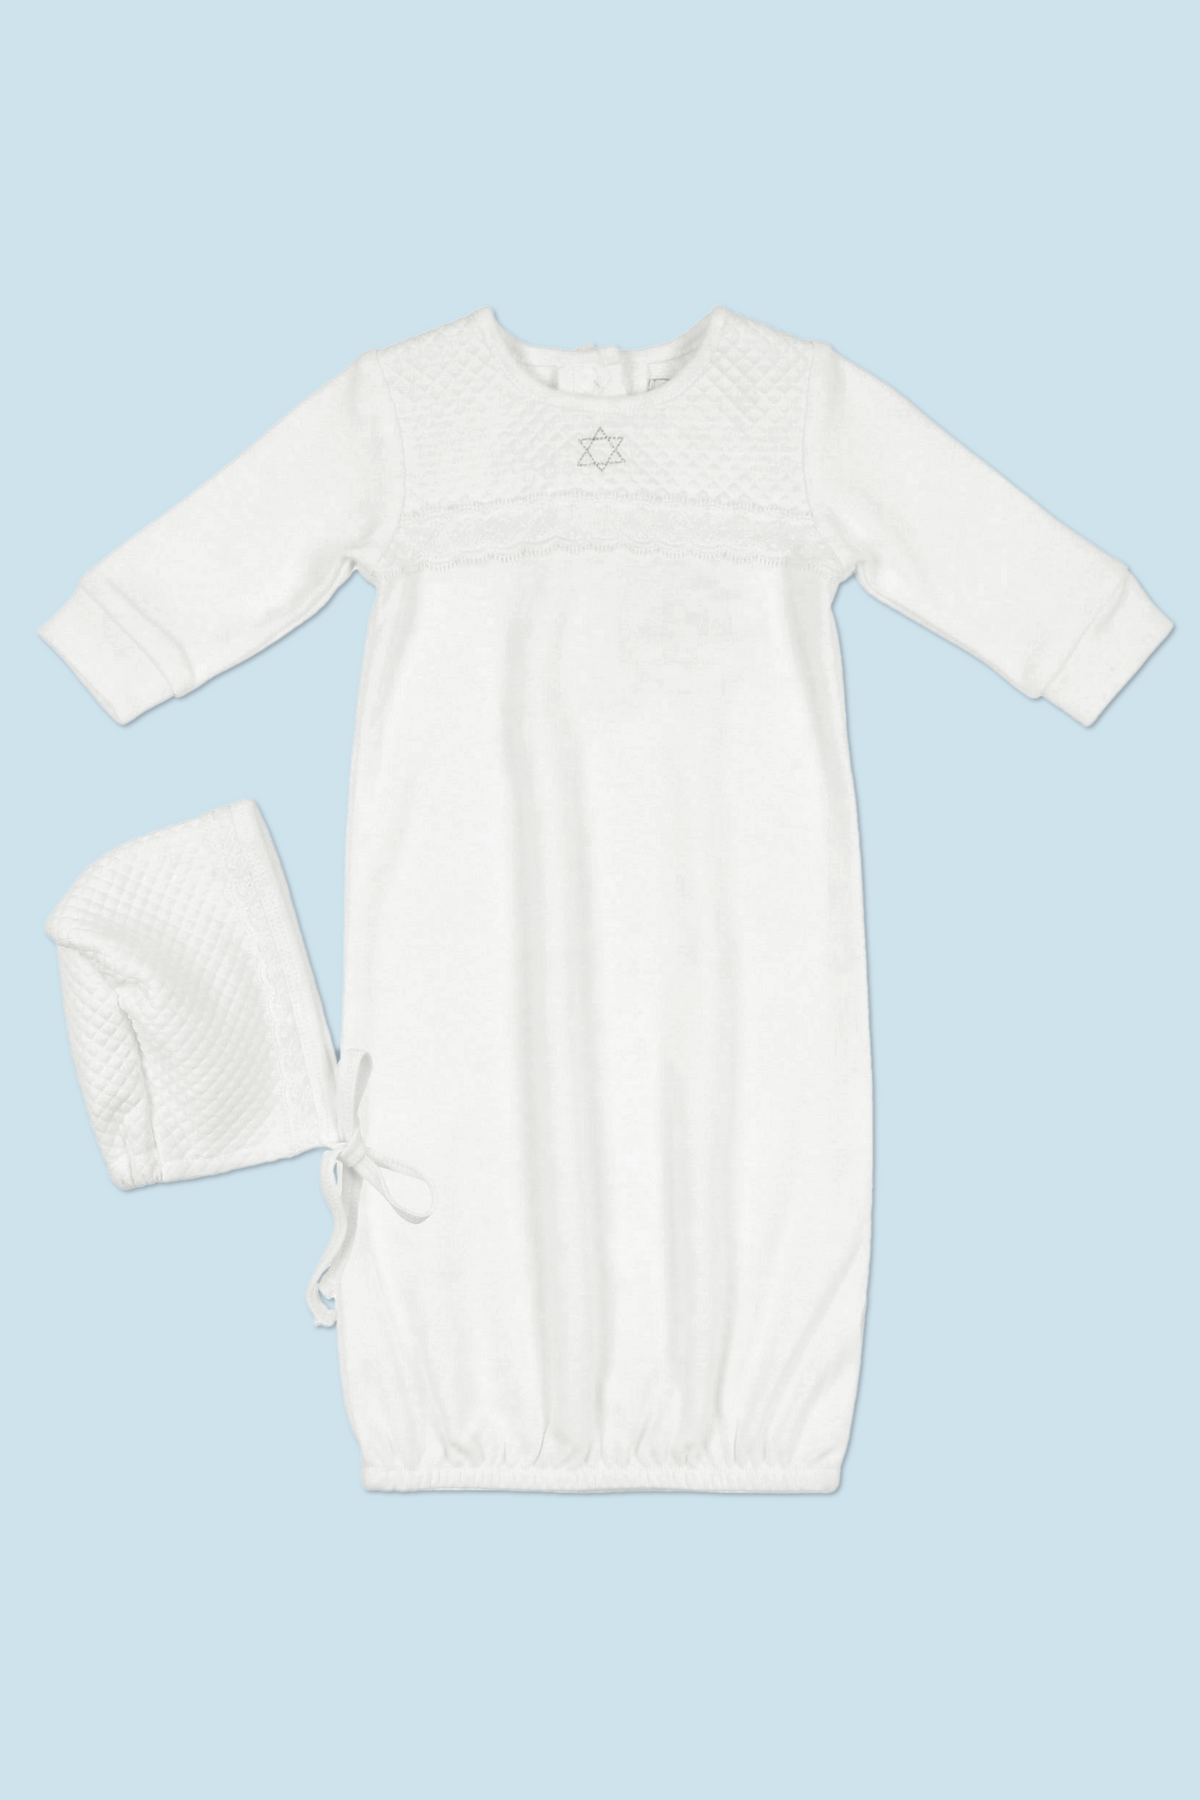 Buy Christening Gowns Online In India - Etsy India